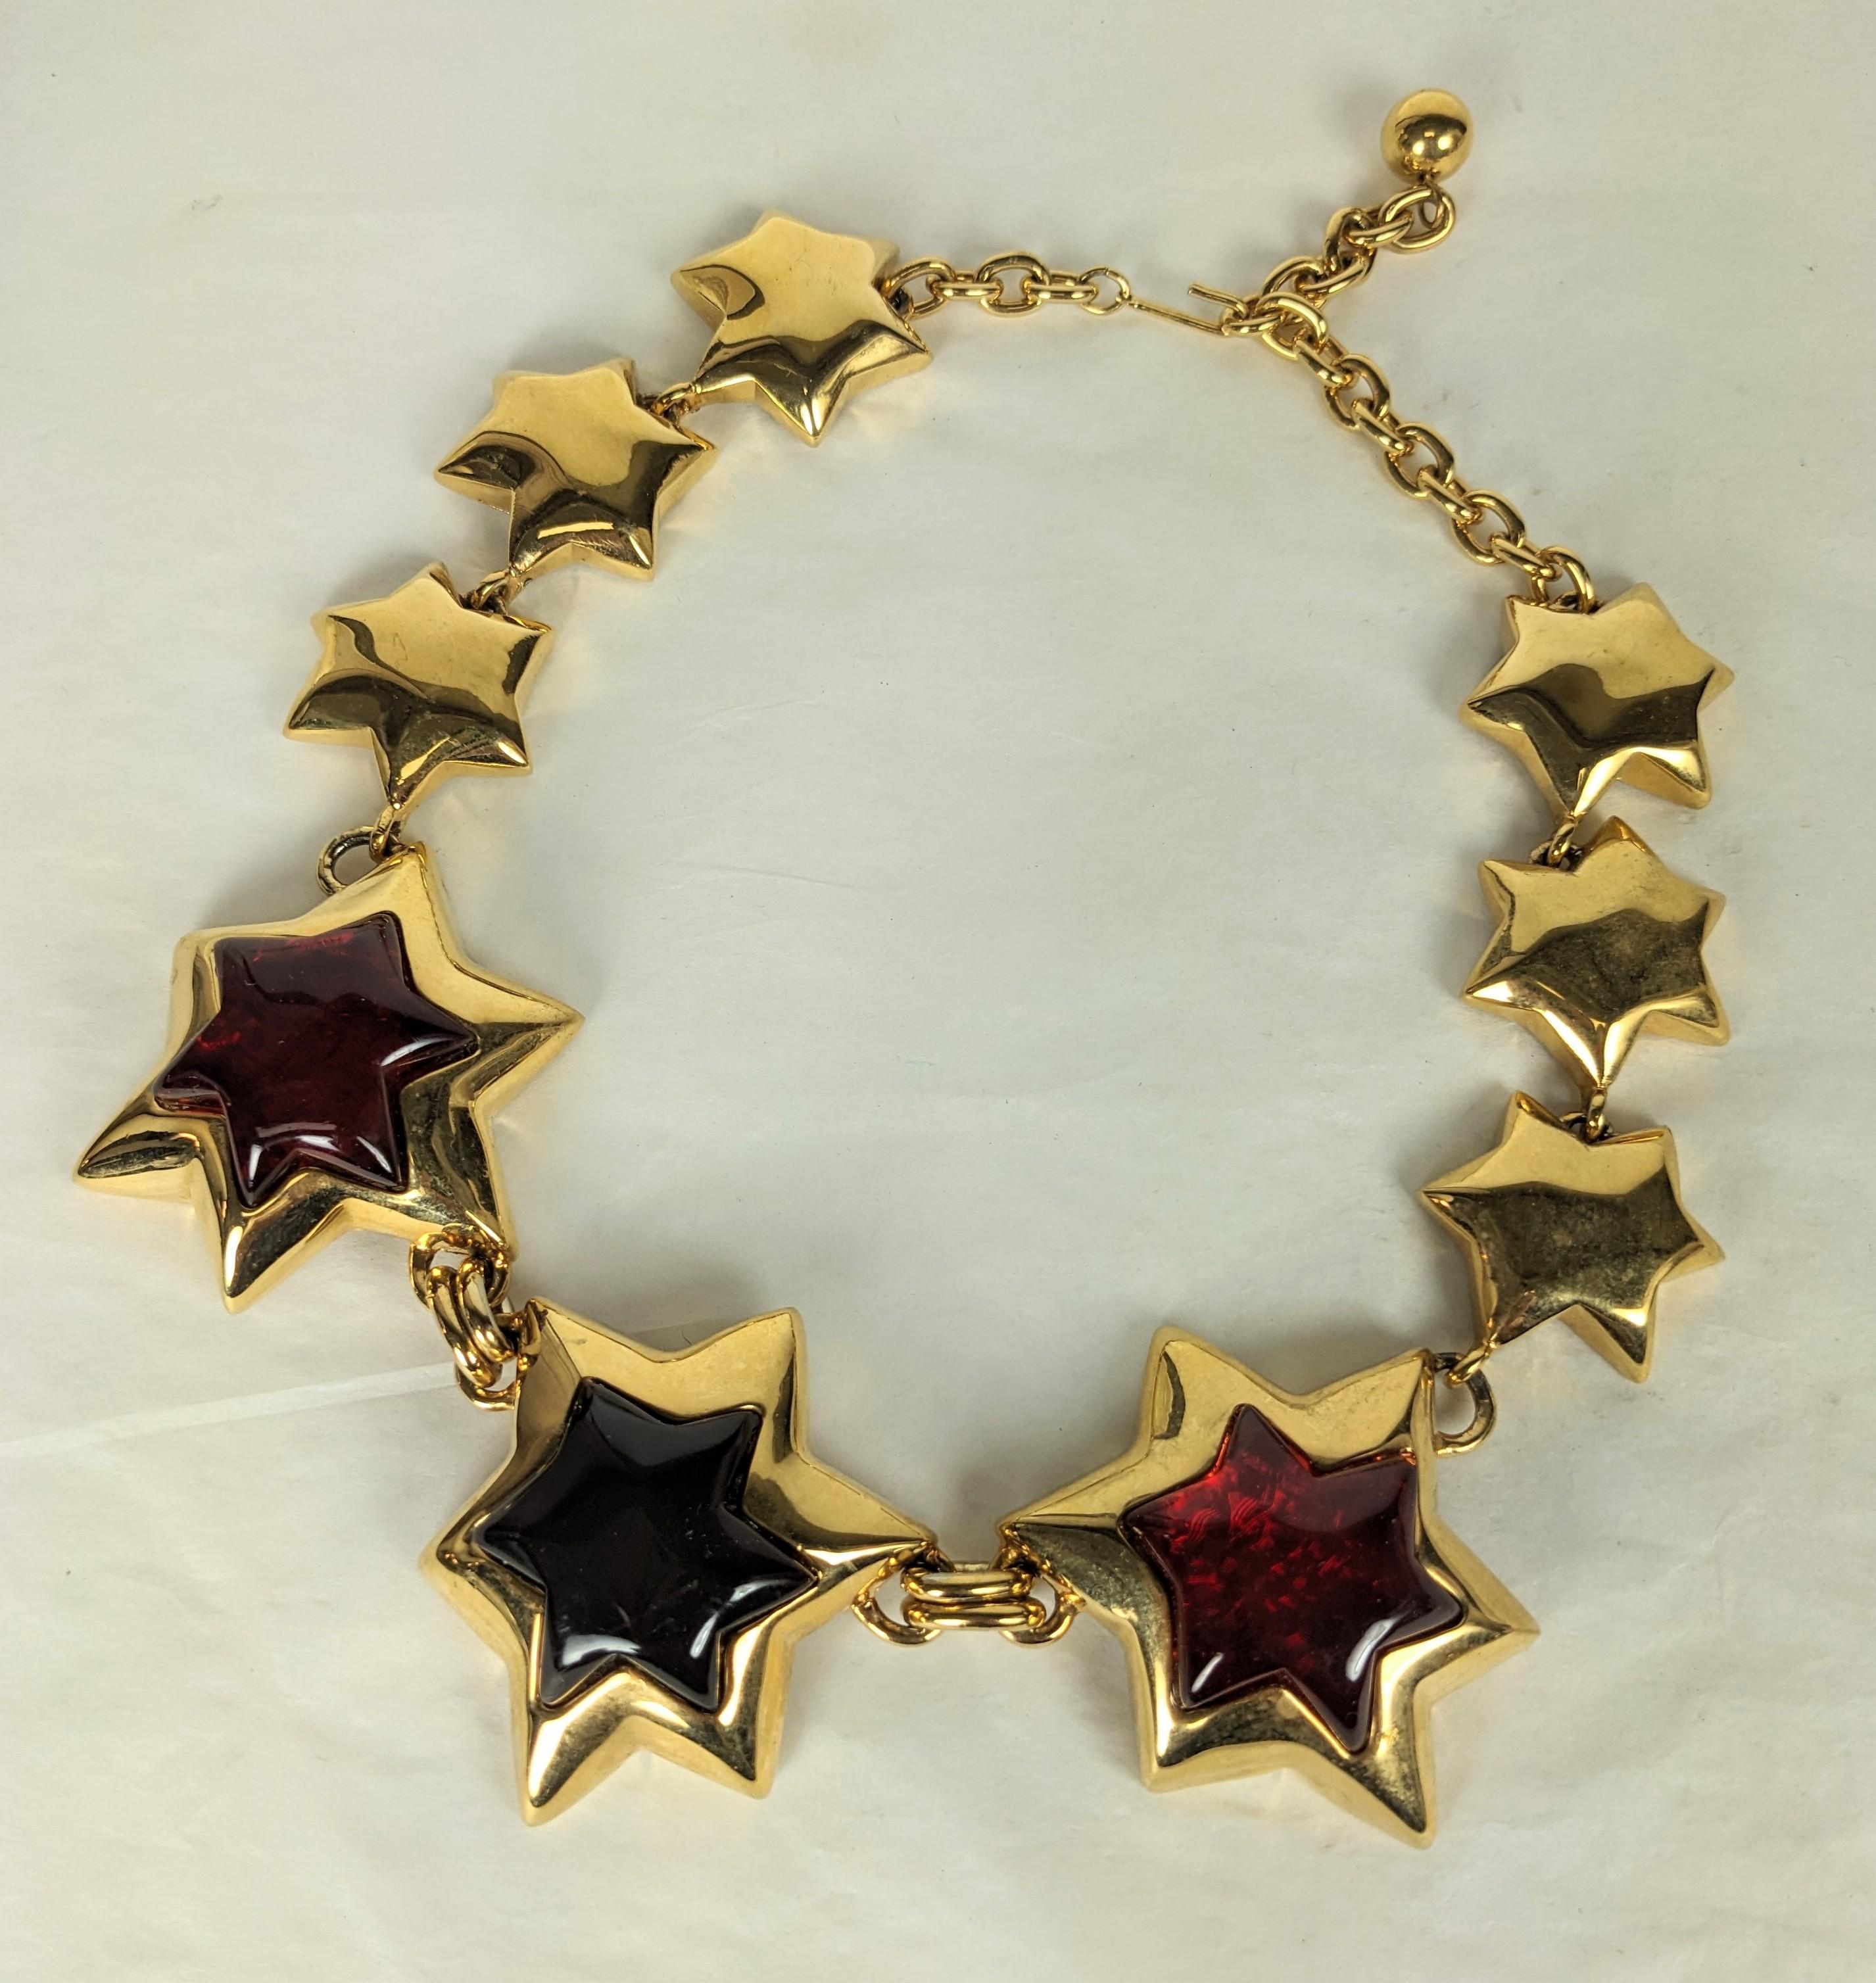 Imposing Gold Toned Star Motif Necklace with resin jelly stones in 2 tones of ruby from the 1990's in the YSL style. Large and striking scale.  Largest star 2.25